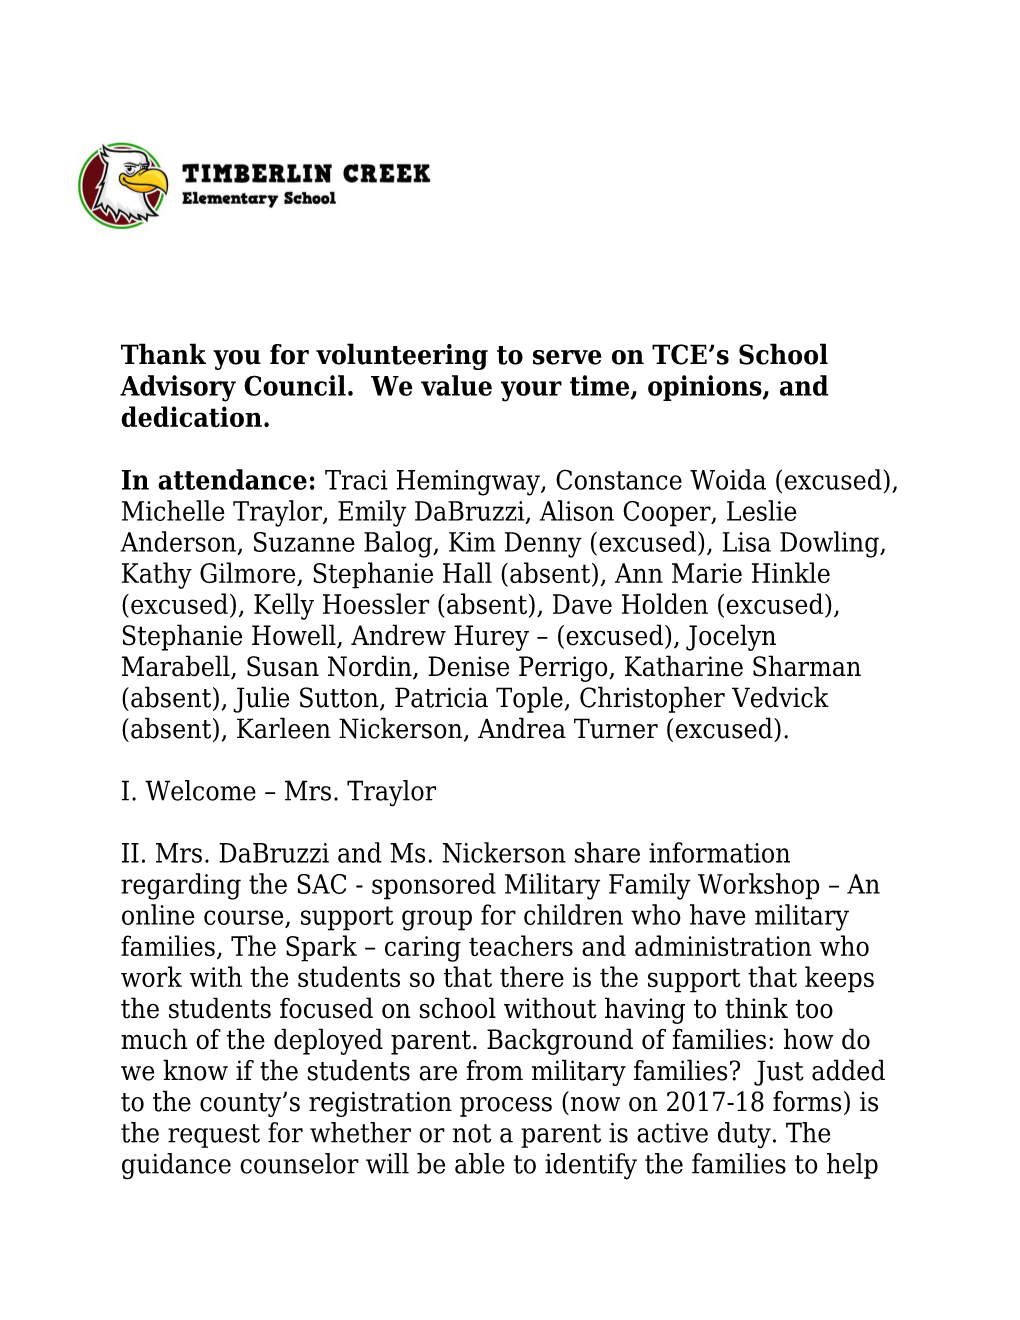 Thank You for Volunteering to Serve on TCE S School Advisory Council. We Value Your Time